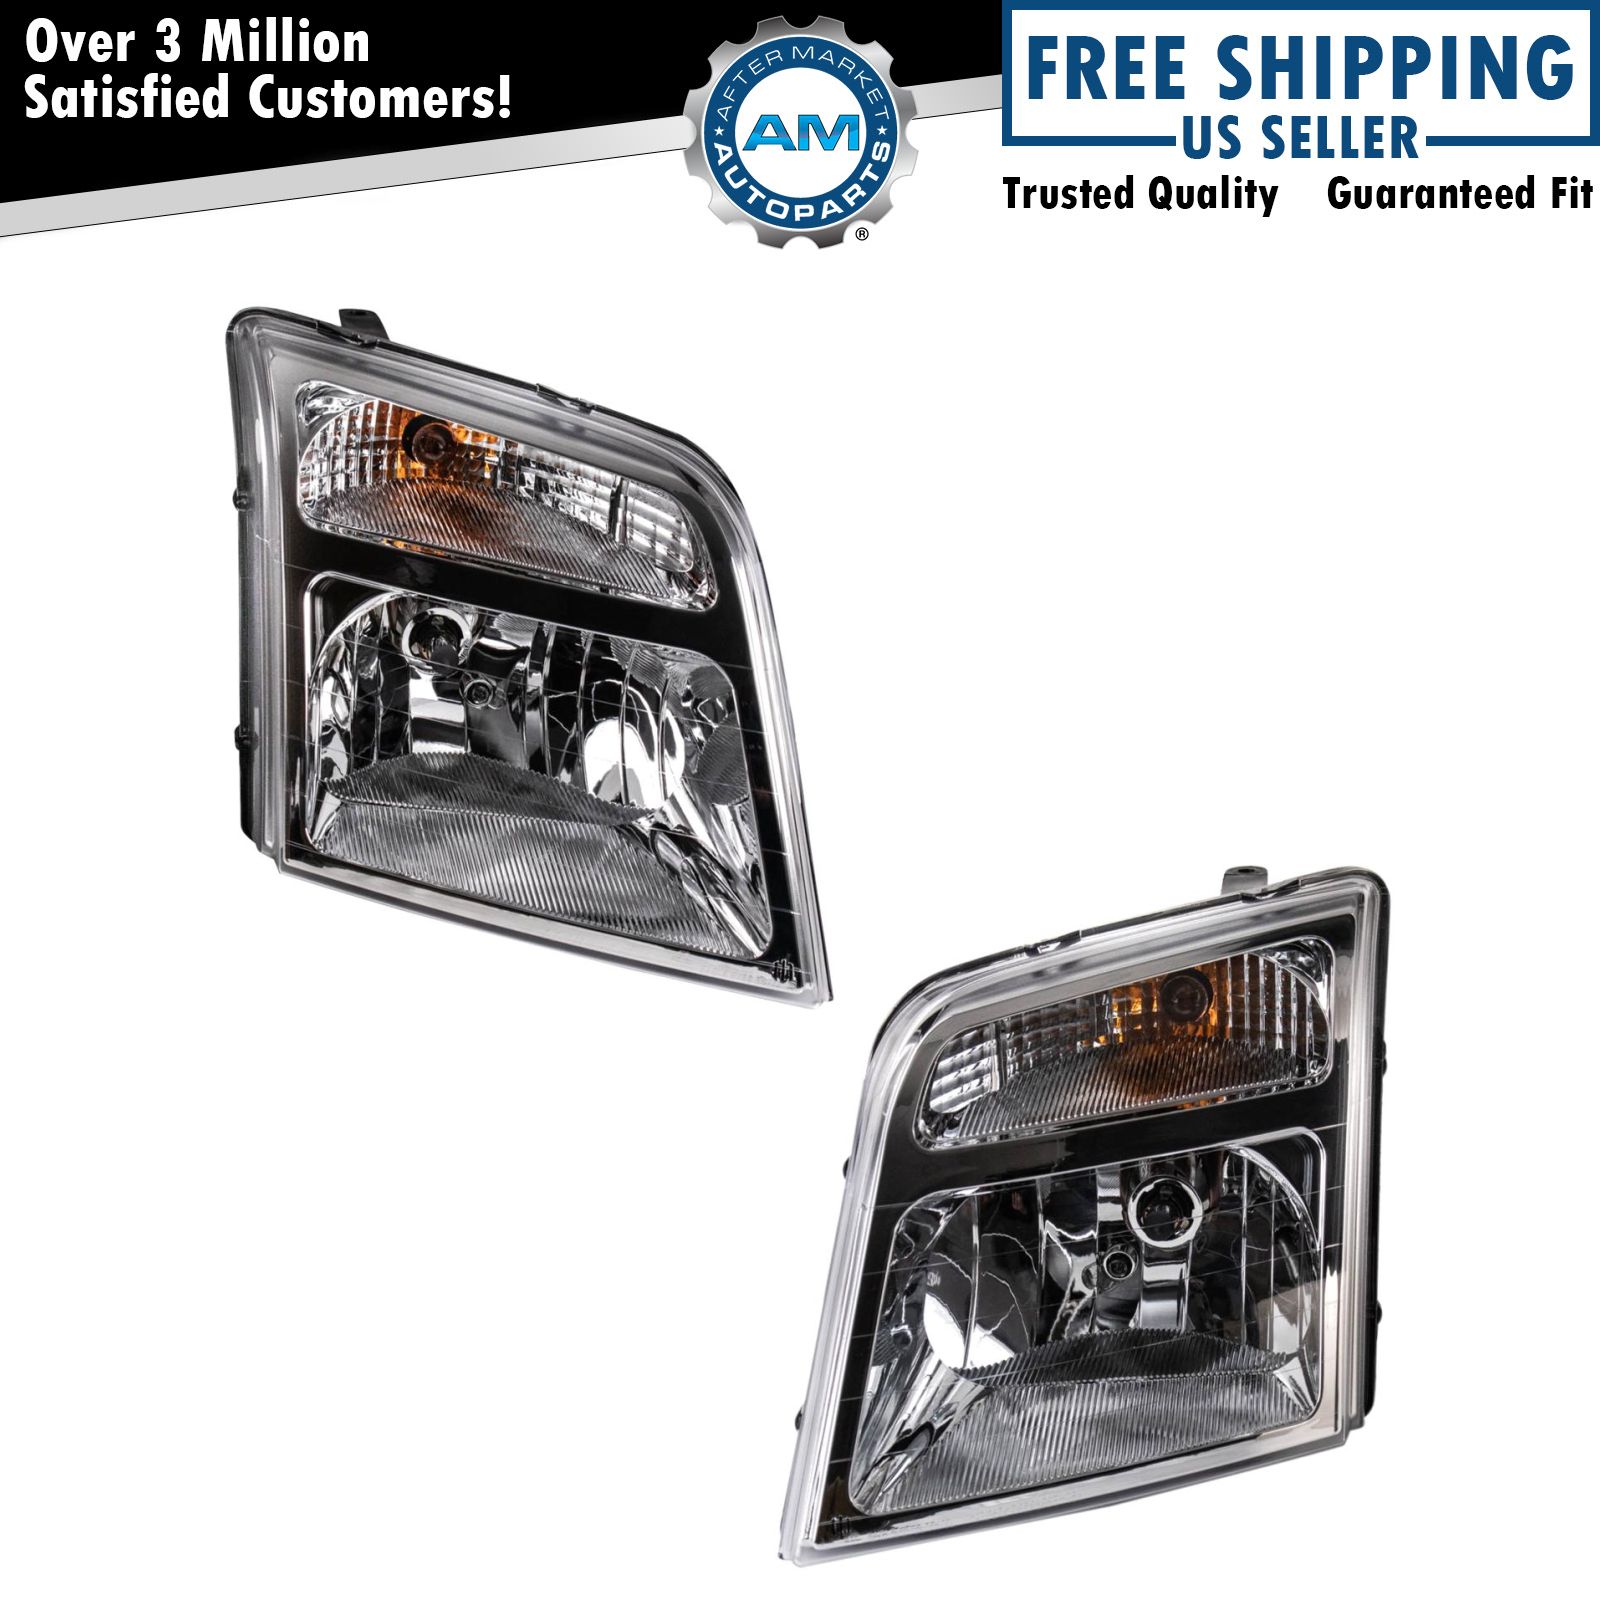 Headlight Set Left & Right For 10-13 Ford Transit Connect FO2502296 FO2503296